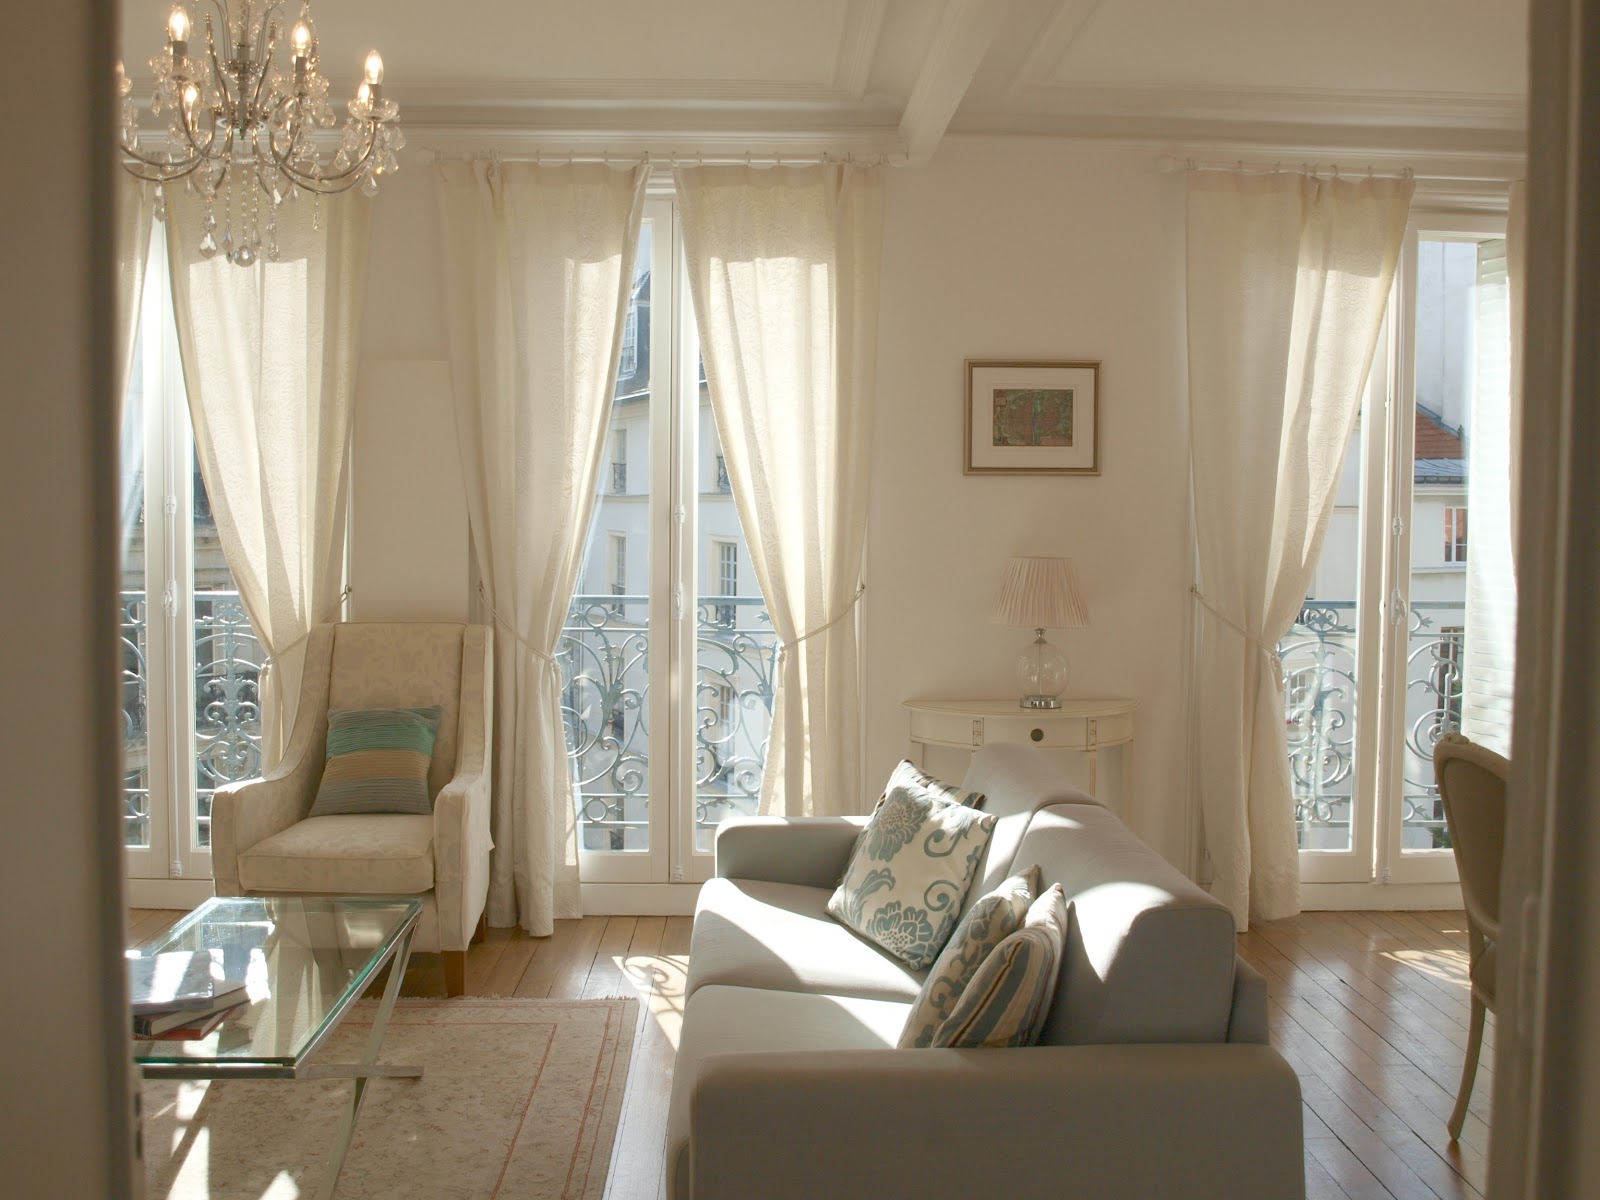 Paris apartment interior design inspiration and decorating ideas if you love a Nordic French romantic and slightly shabby chic look. #hellolovelystudio #parisapartment #interiordesign #decoratingideas #romantcdecor #chic #frenchhome